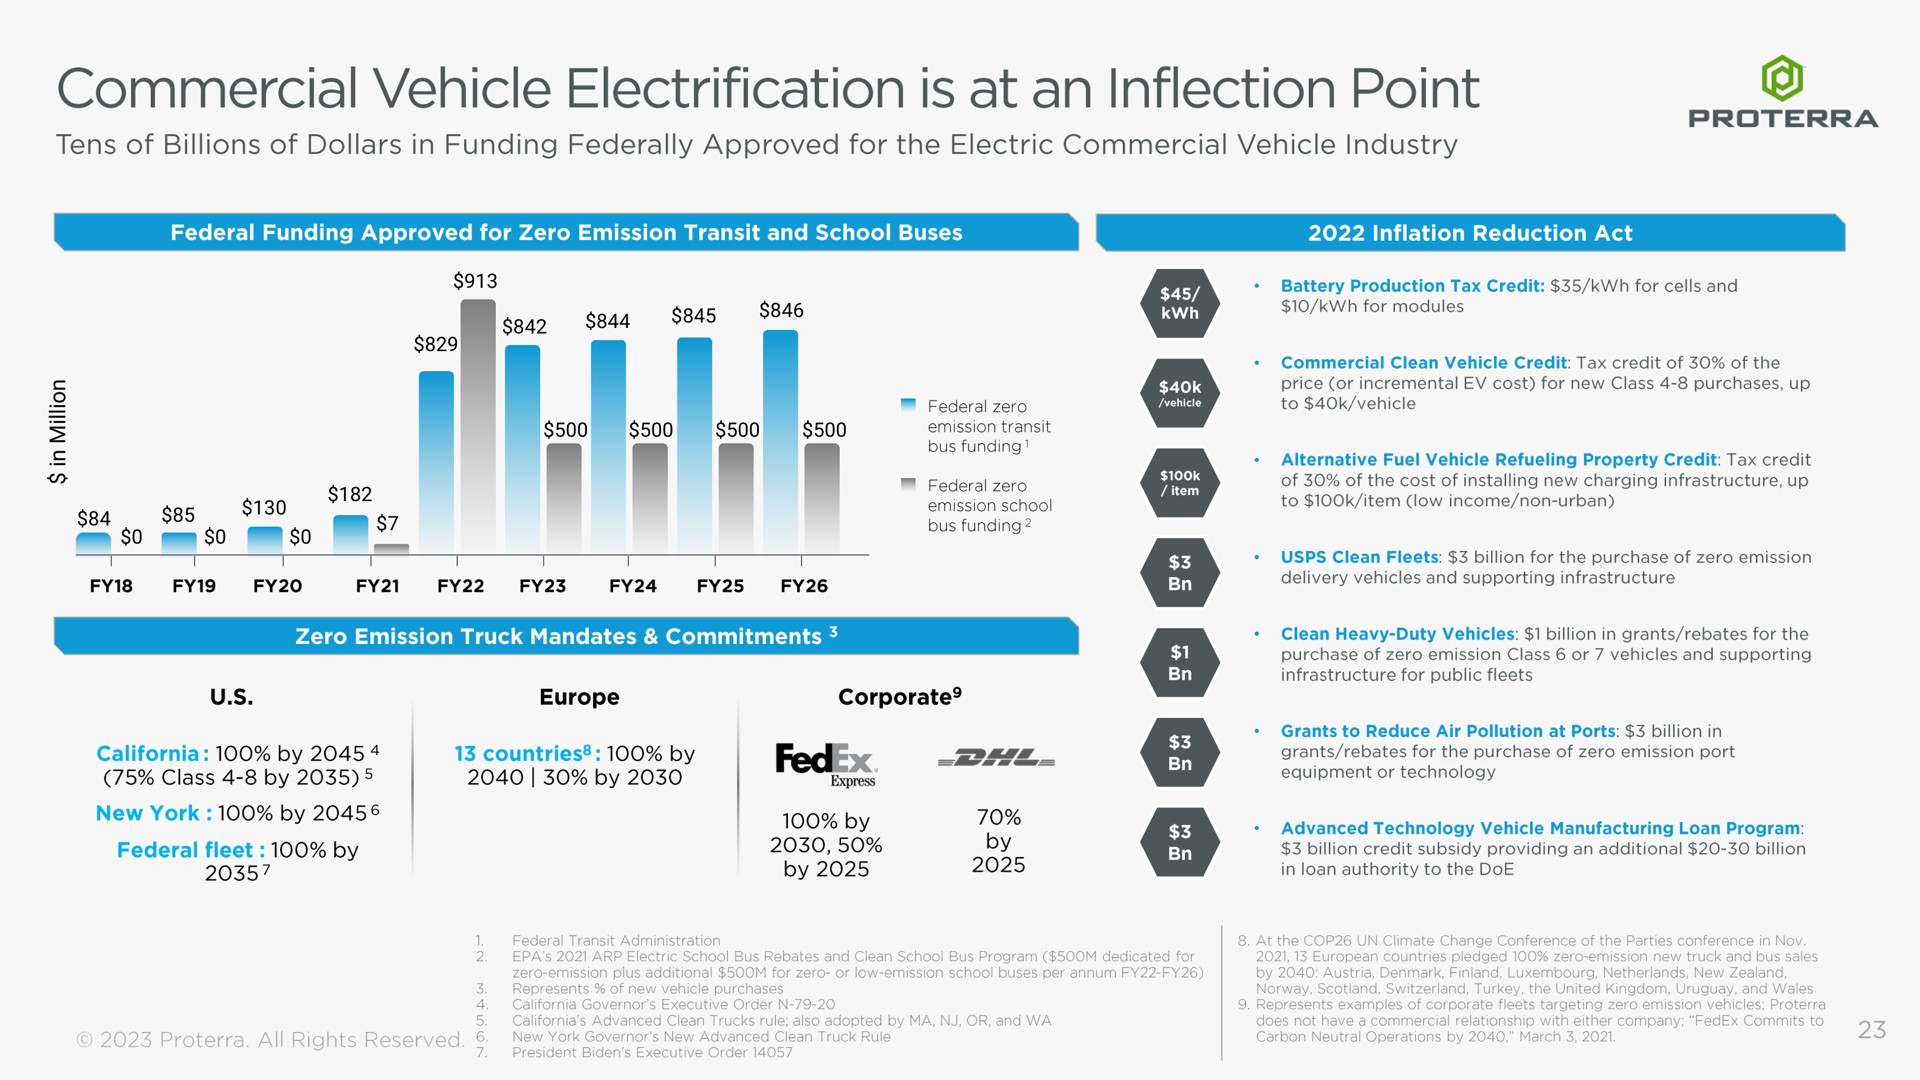 commercial vehicle electrification is at an inflection point goa | Proterra